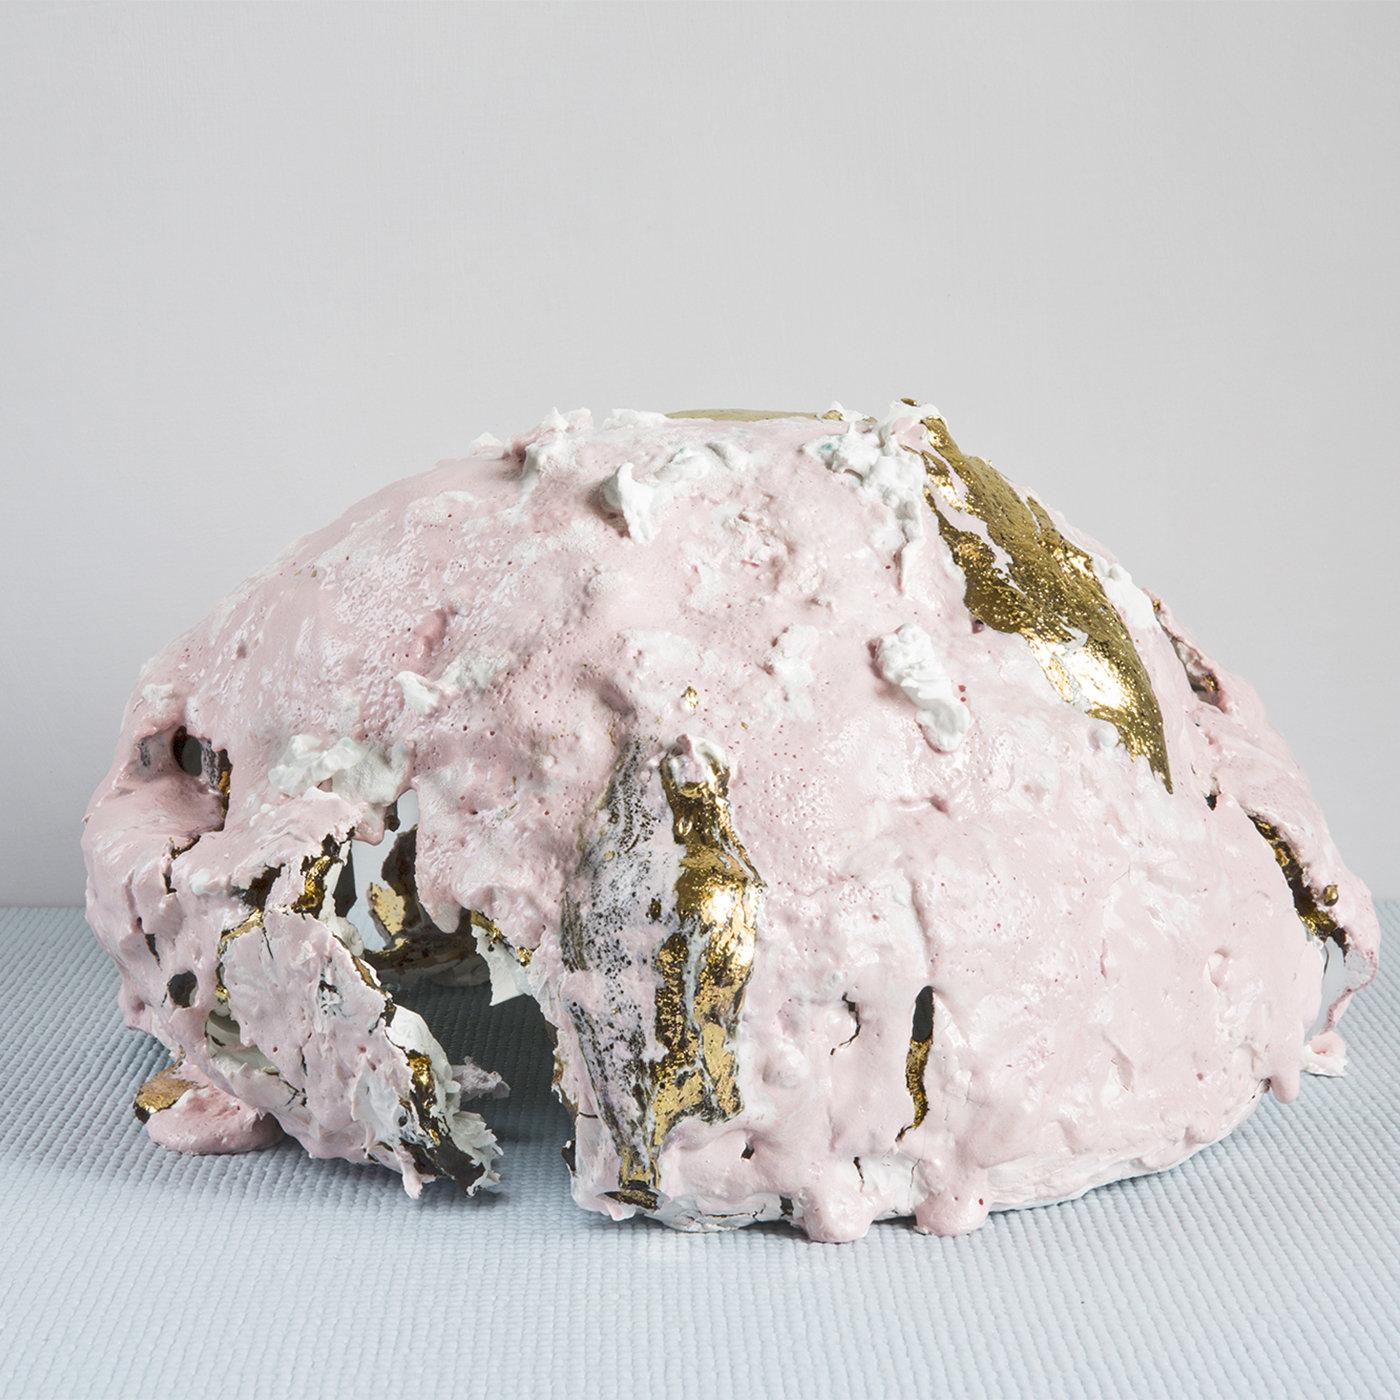 Featuring pastel pink color and gold detail over a hemispherical design, this fascinating piece is part of a series of original and creative items made in total freedom and experimentation, with the addition of silicone, crystals, porcelain animals